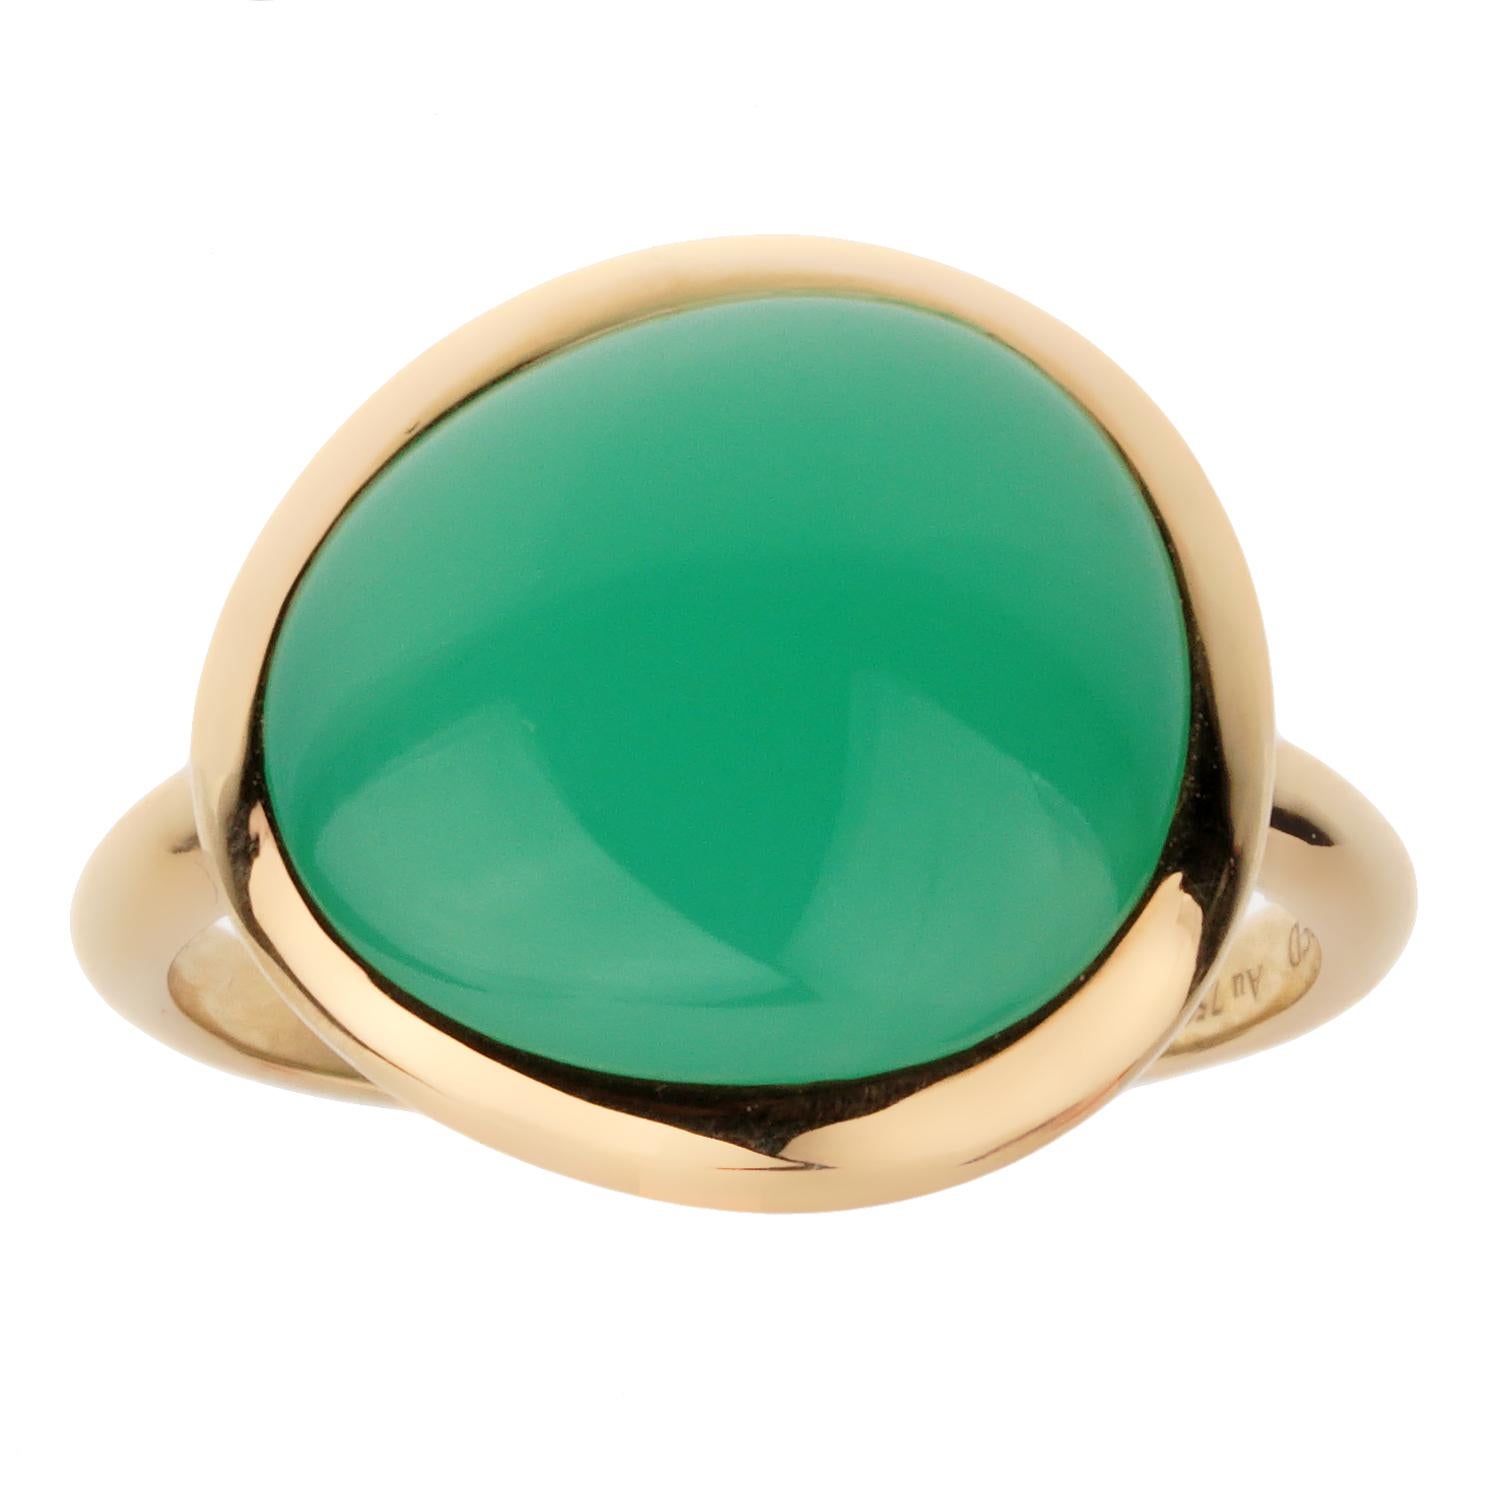 A chic Fred of Paris yellow gold cocktail ring showcasing a 7ct cabochon Chrysophase set in 18k gold. The ring measures a size 7 1/2 and can be resized if needed.